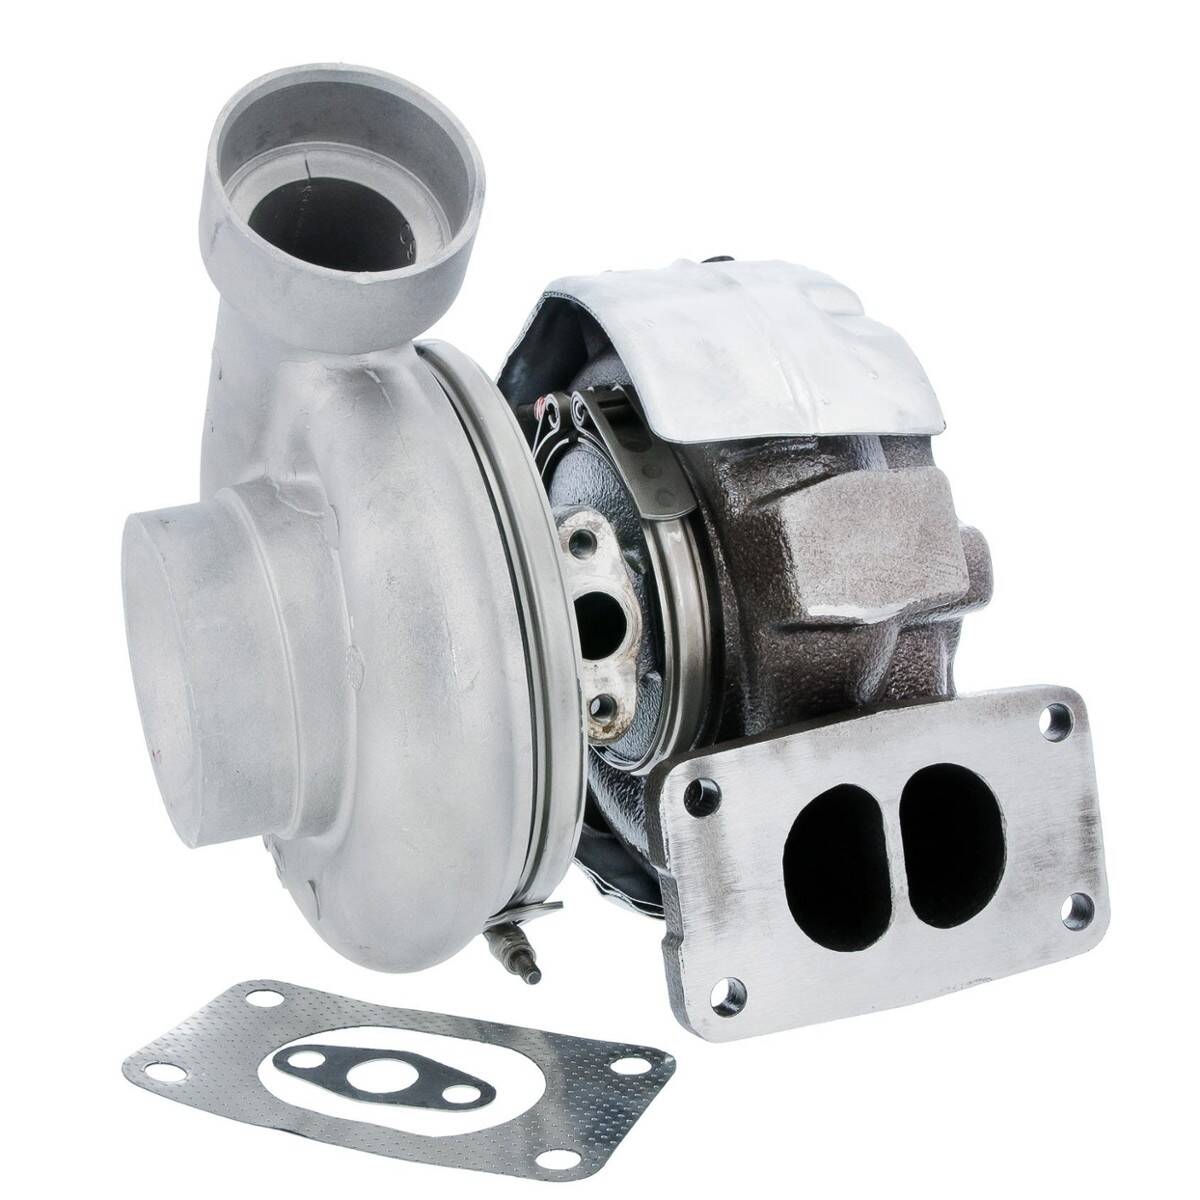 TURBOCHARGER TURBO REMANUFACTURED 317405 316699 317405